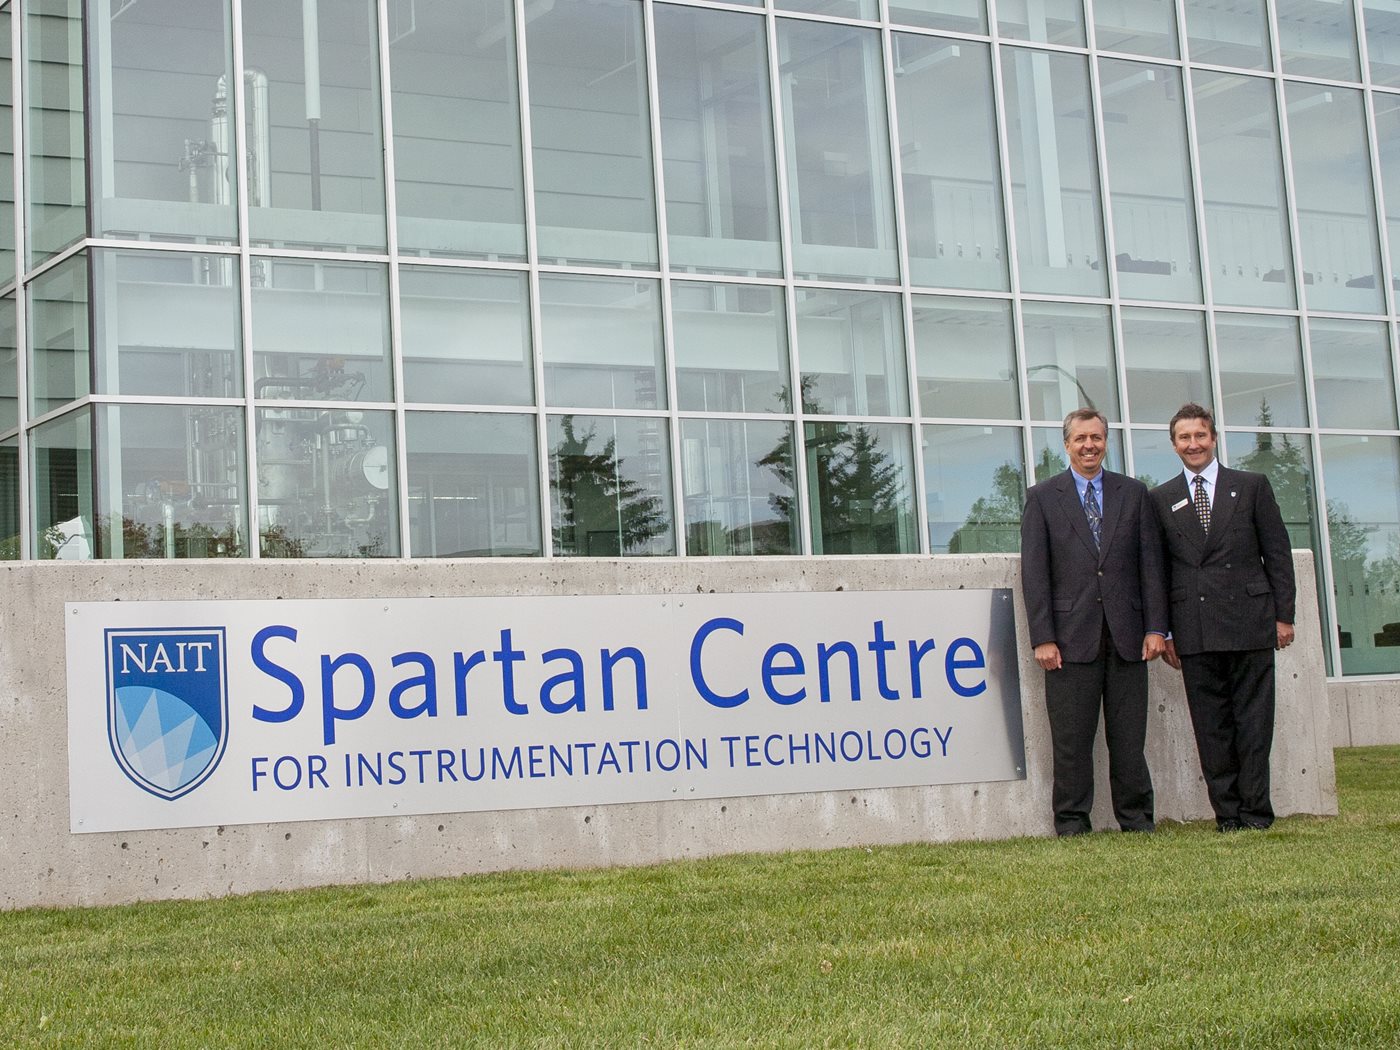 Mike Begin and Sam Shaw stand in from of the Spartan Centre for Instrumentation Technology on NAIT's campus in 2007